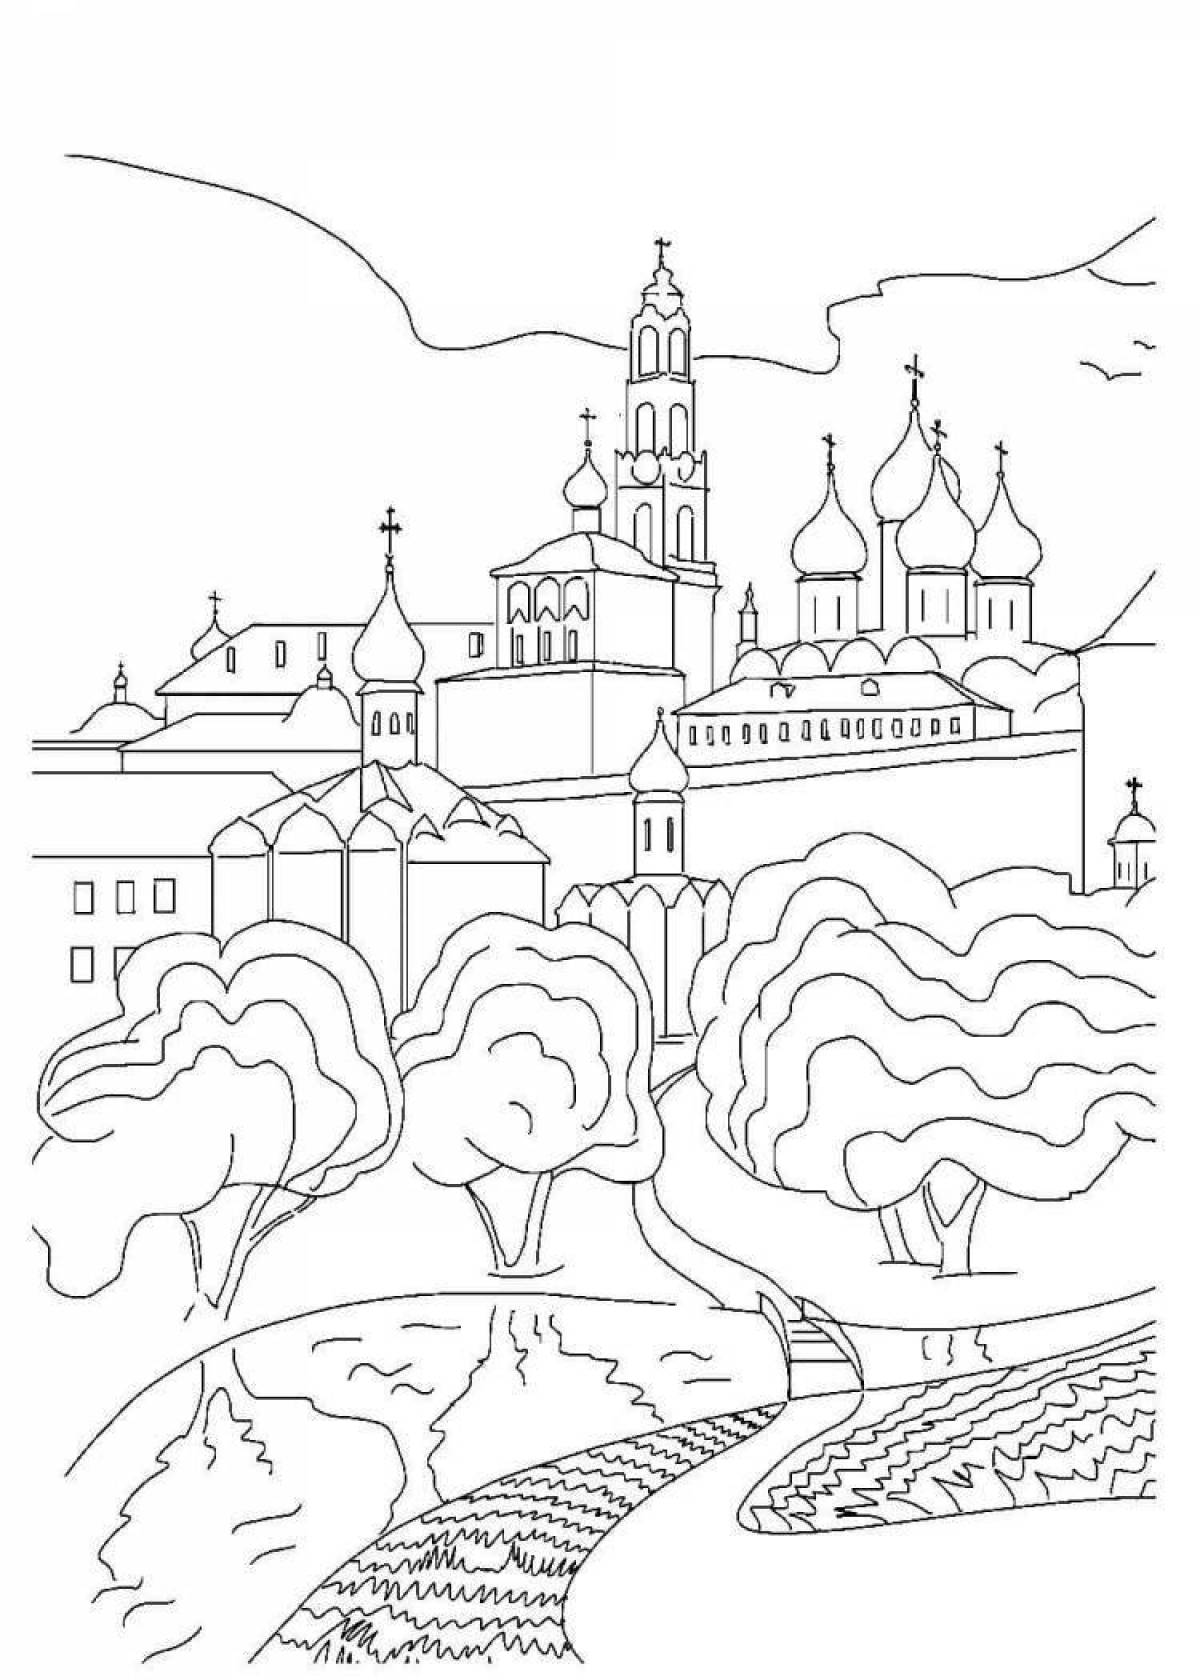 Playful russia my homeland coloring book for children 6-7 years old